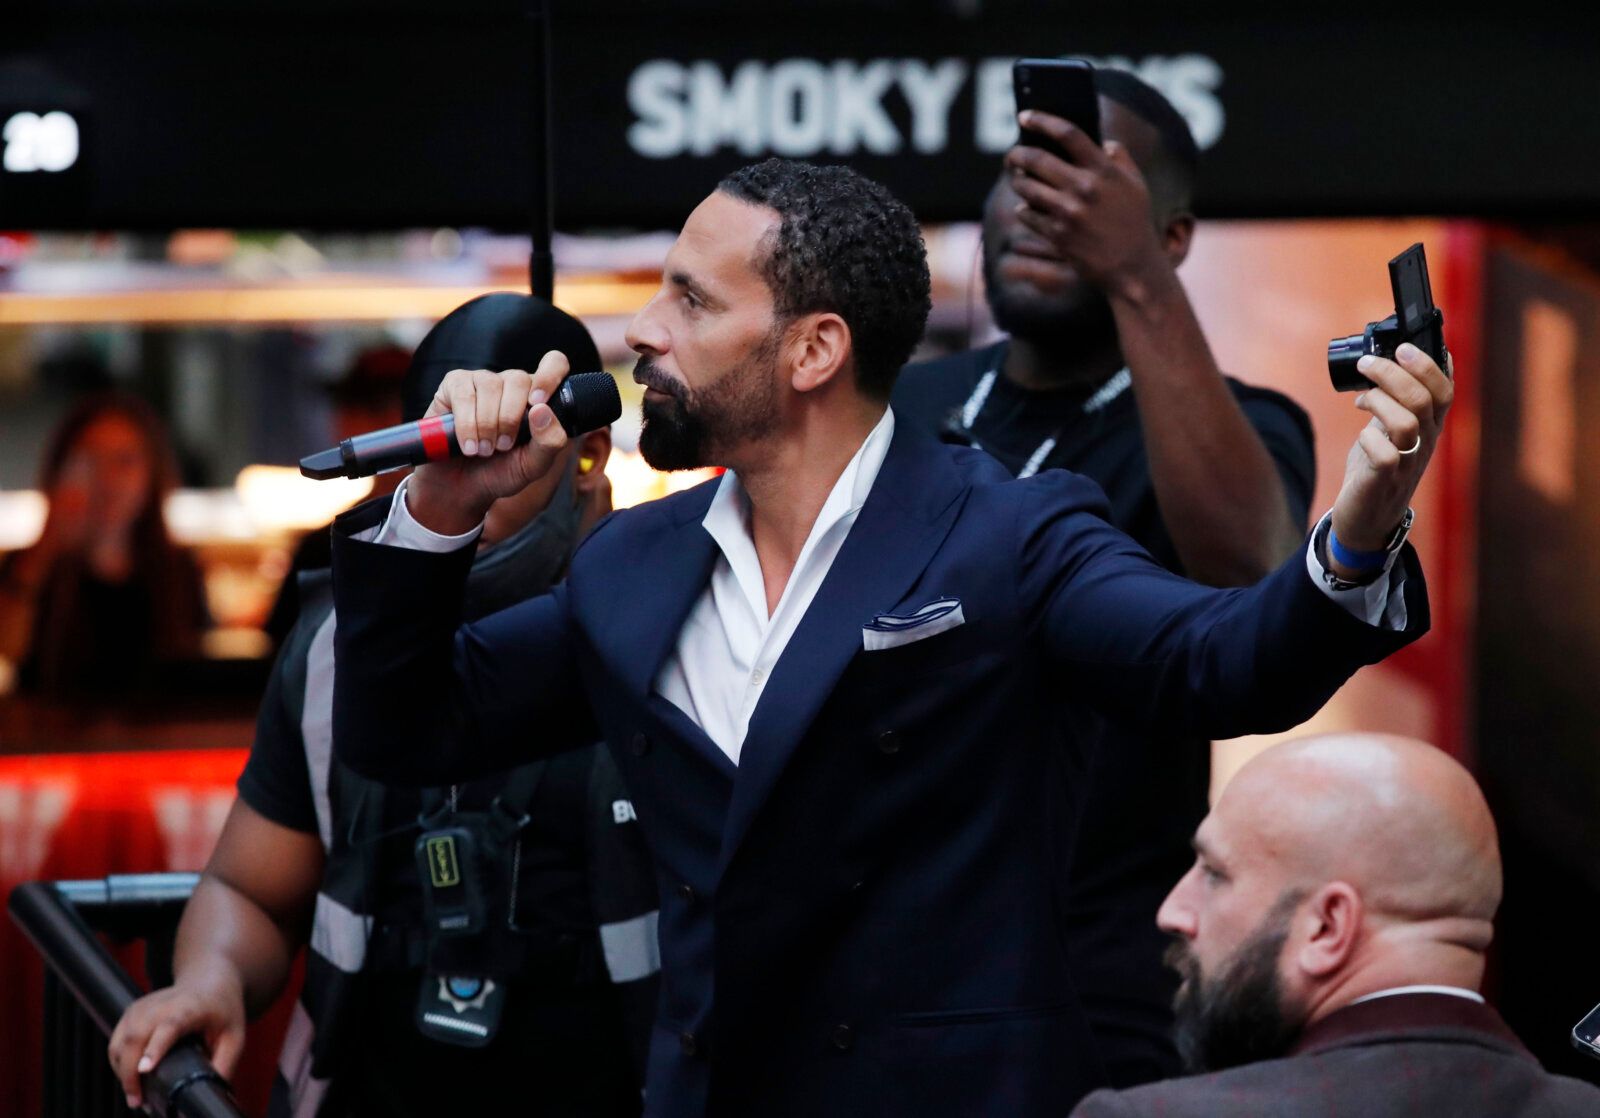 Soccer Football - Euro 2020 - Fans gather for England v Denmark - Boxpark, Wembley, London, Britain - July 7, 2021 Former player Rio Ferdinand talks to the crowd before the match Action Images via Reuters/Andrew Couldridge